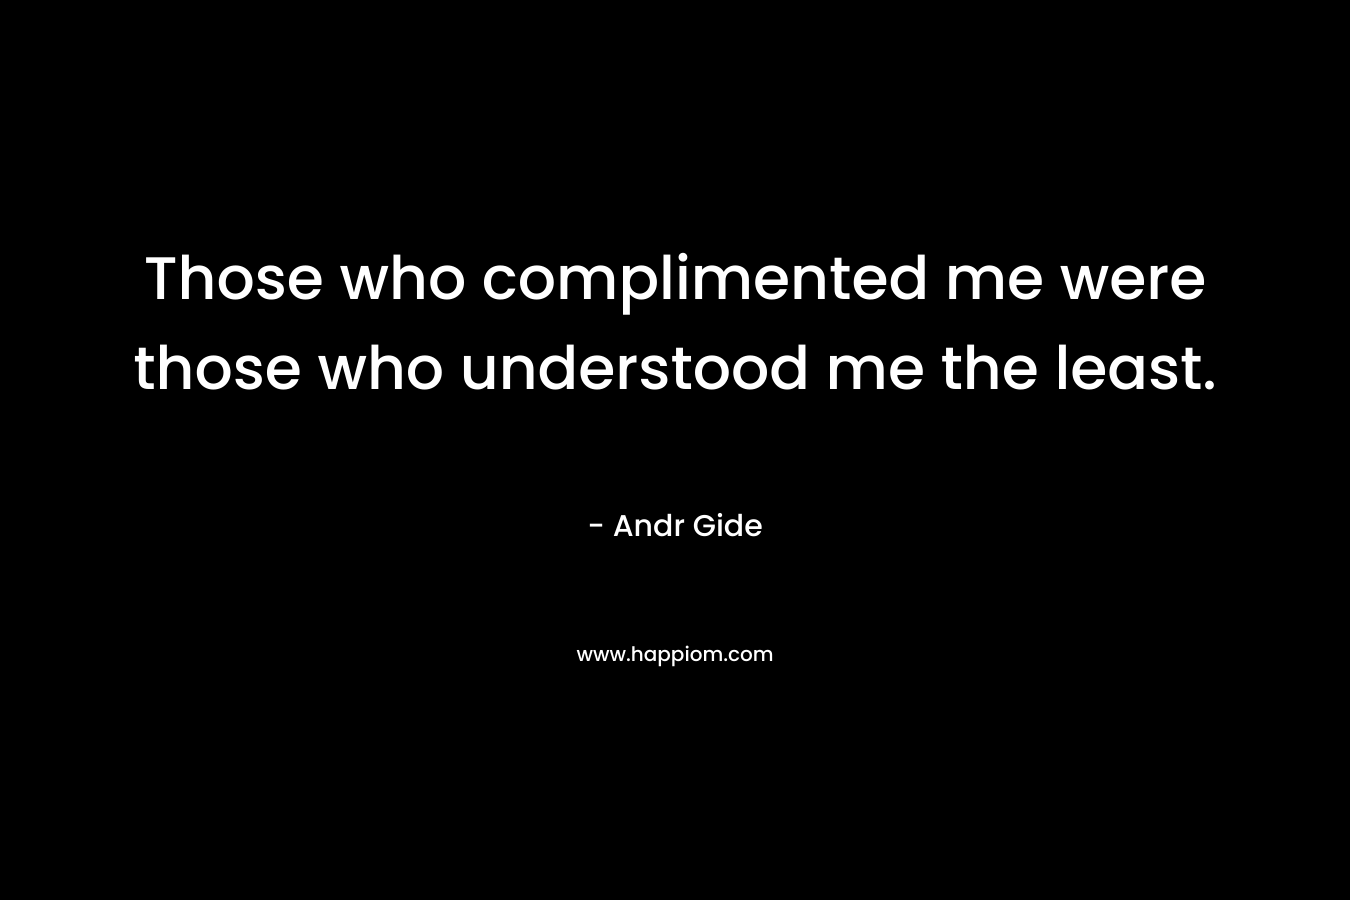 Those who complimented me were those who understood me the least.